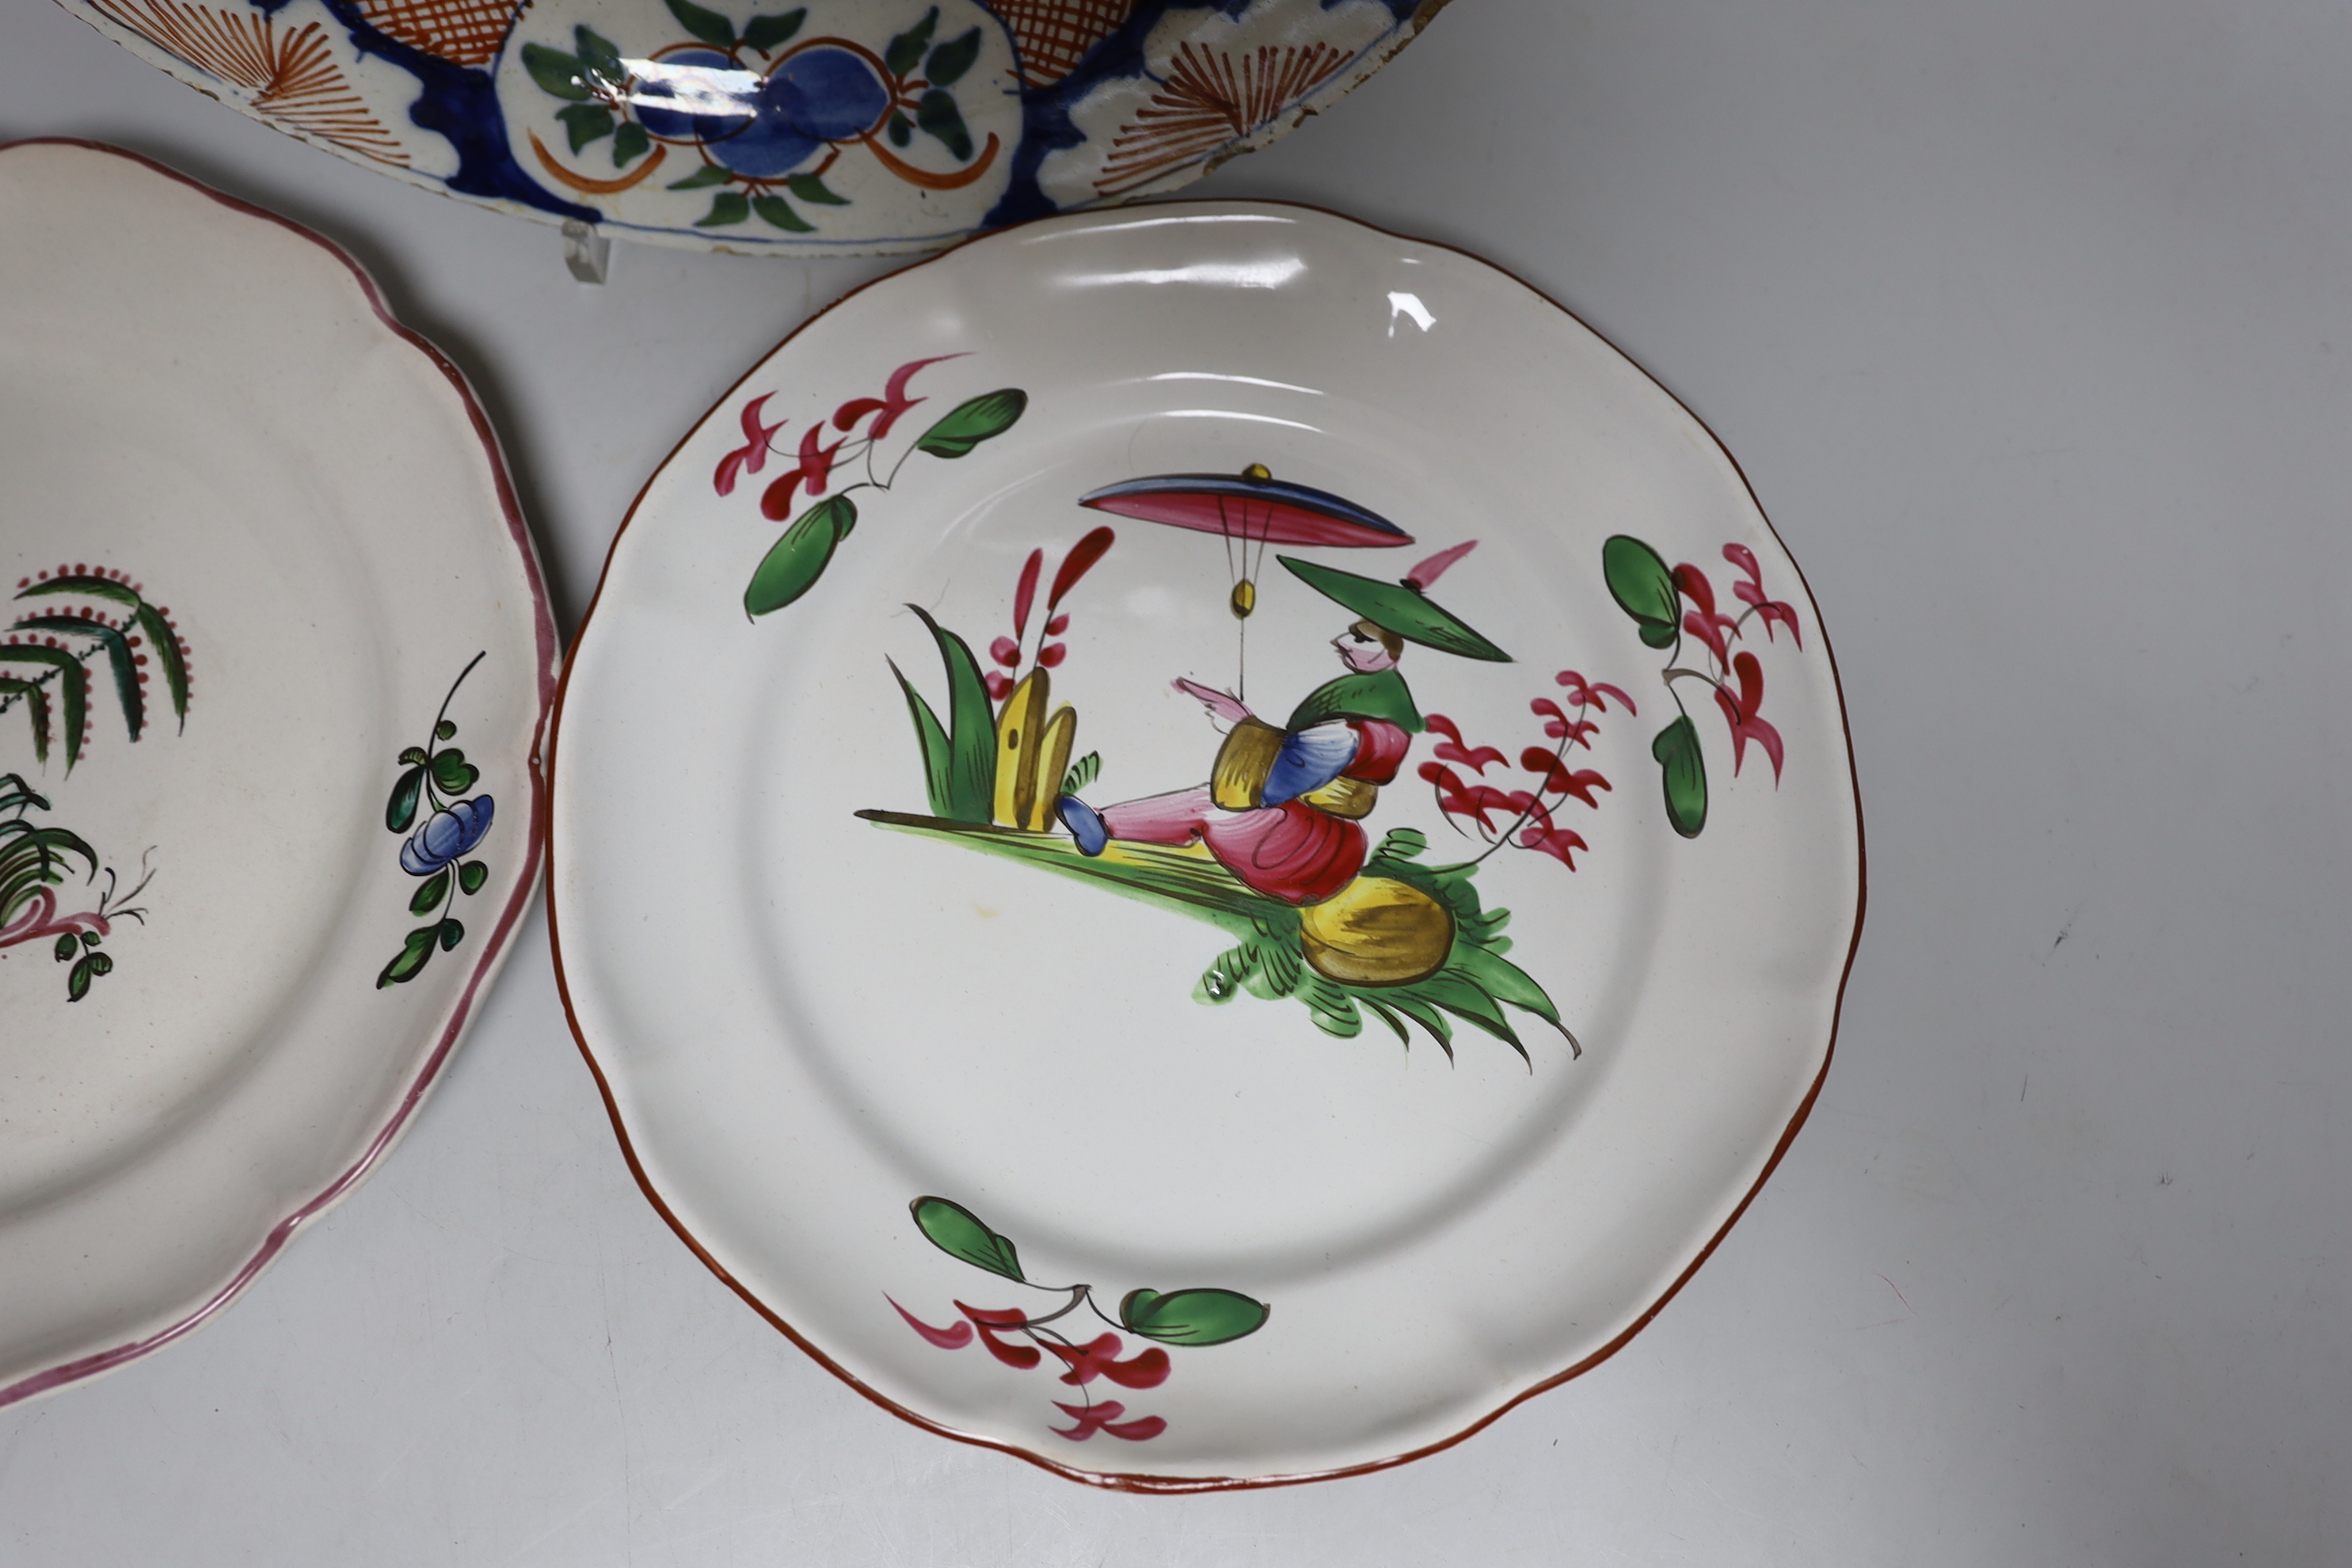 An 18th century Delft plate and three 19th century faience plates, largest 26cm diameter (4)